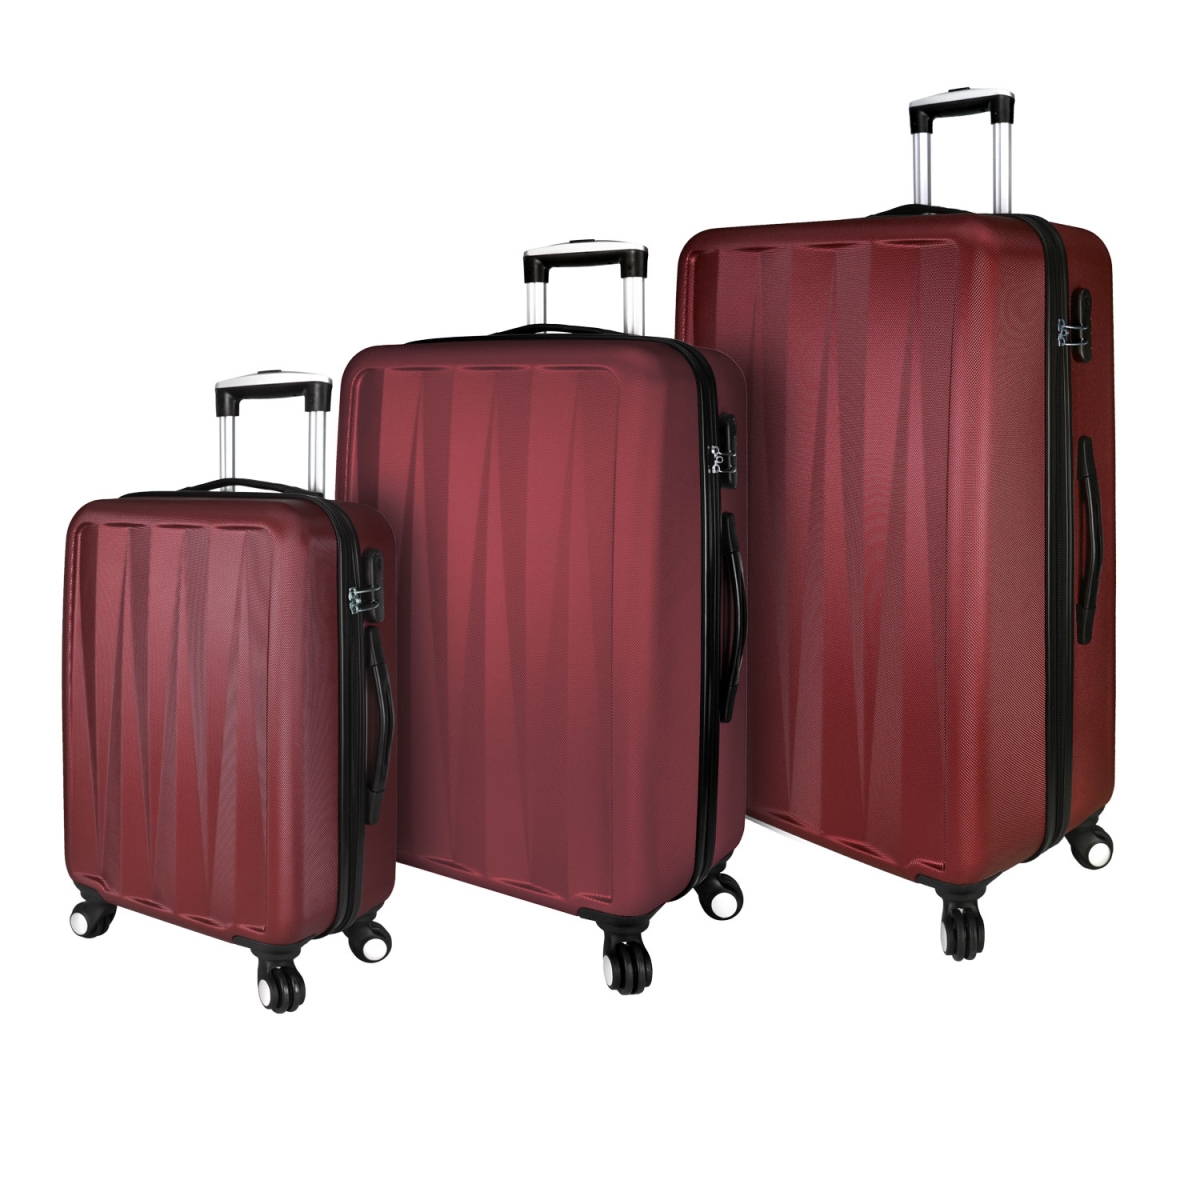 Picture of Elite Luggage EL09078R Verdugo Hardside 3 Piece Spinner Luggage Set, Red